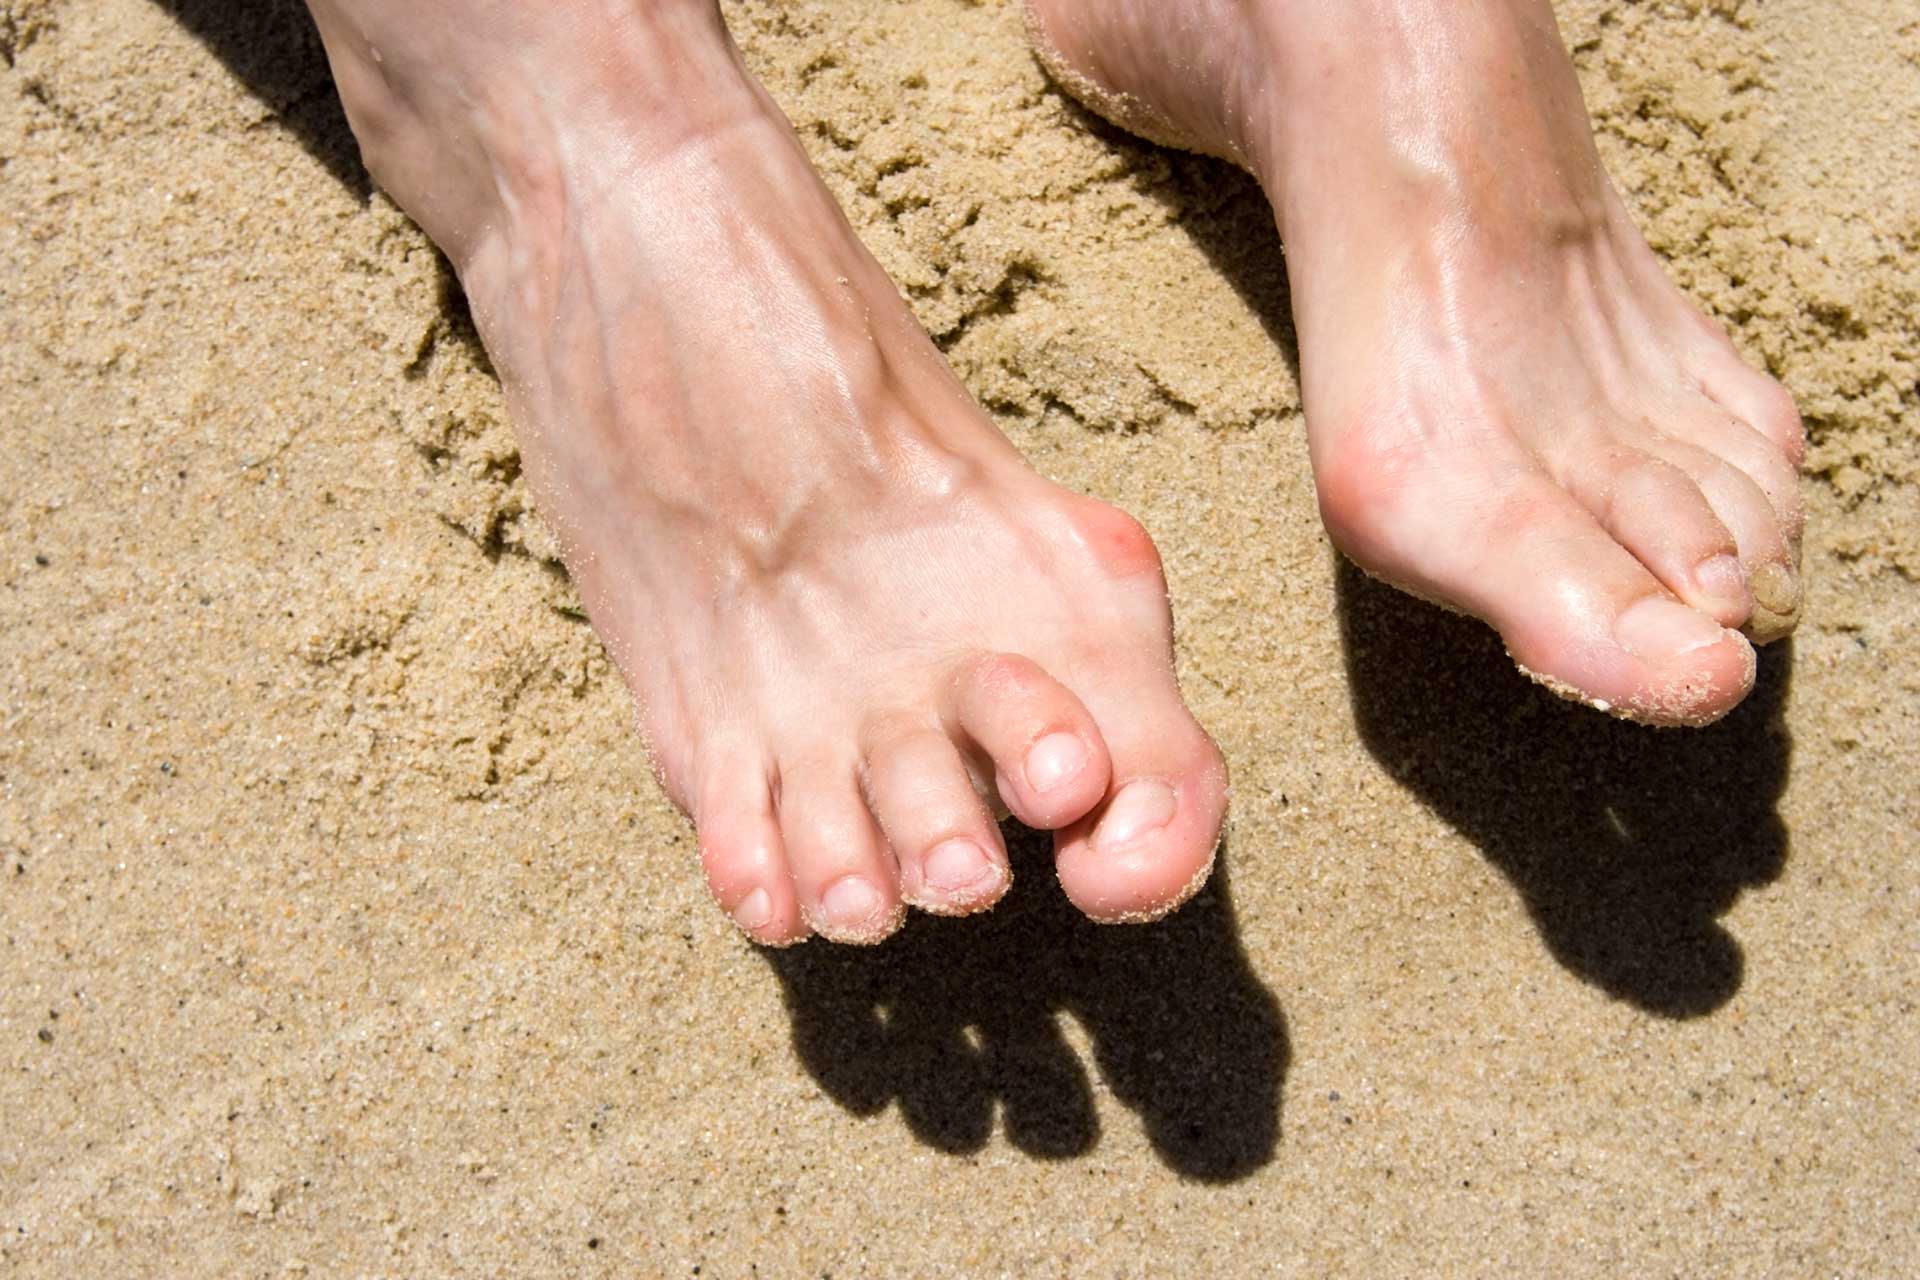 Wearing Flip Flops May Lead to Hammer Toes